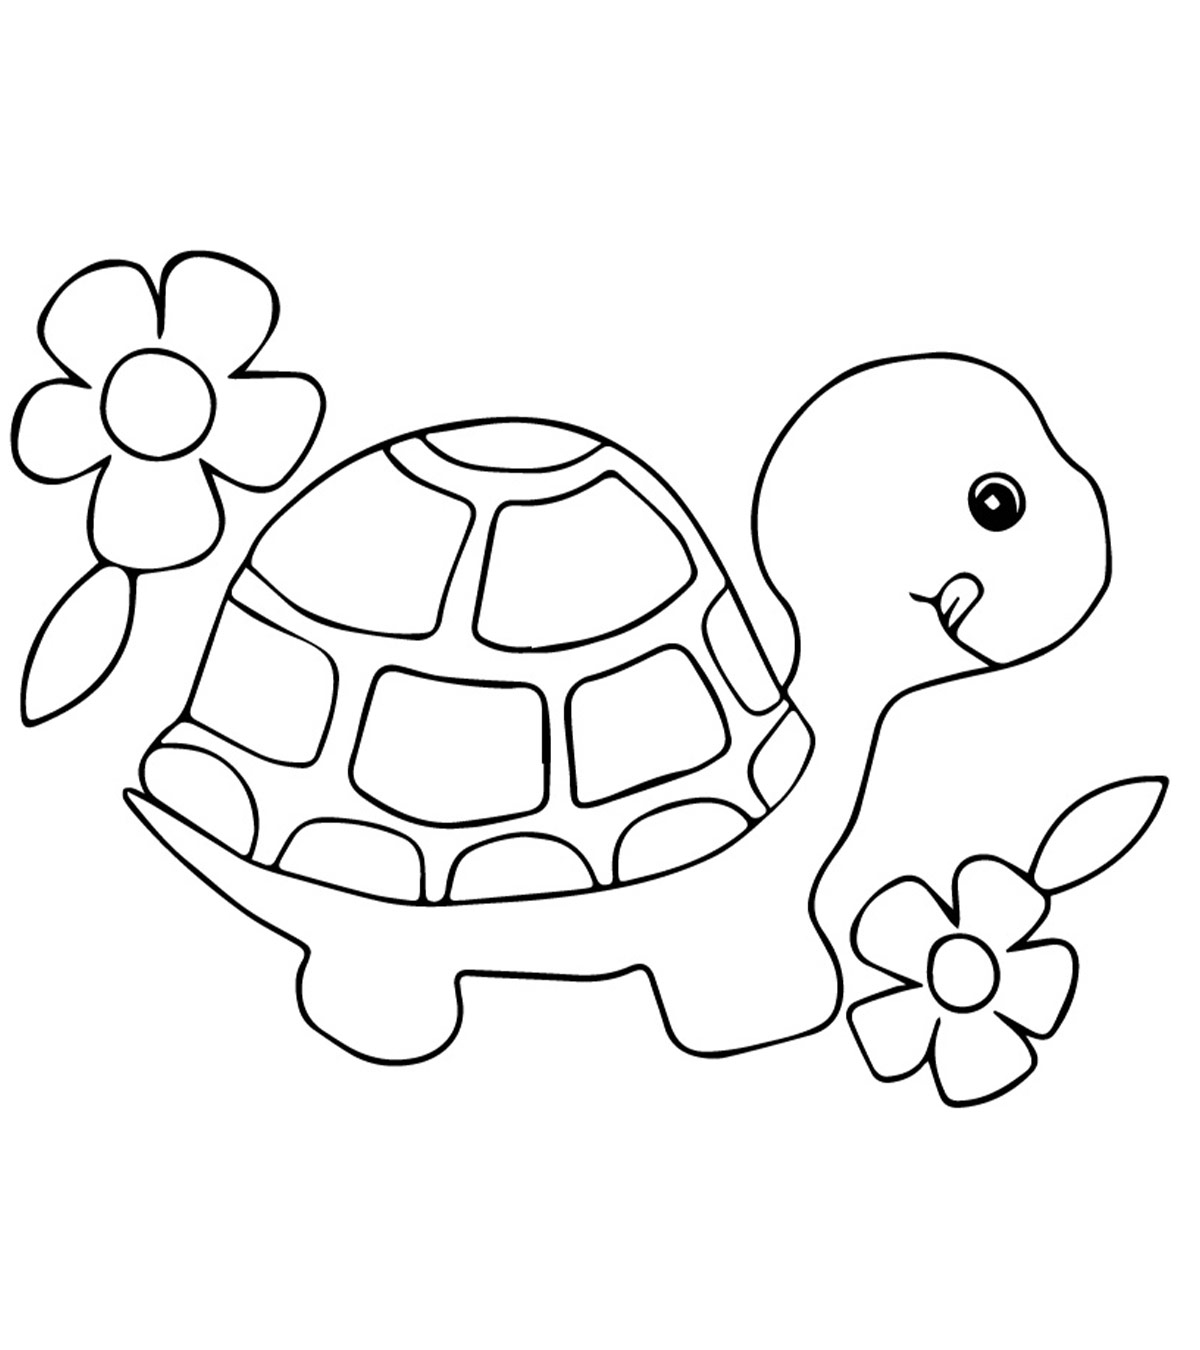 Top 20 Turtle Coloring Pages Your Toddler Will Love To Color